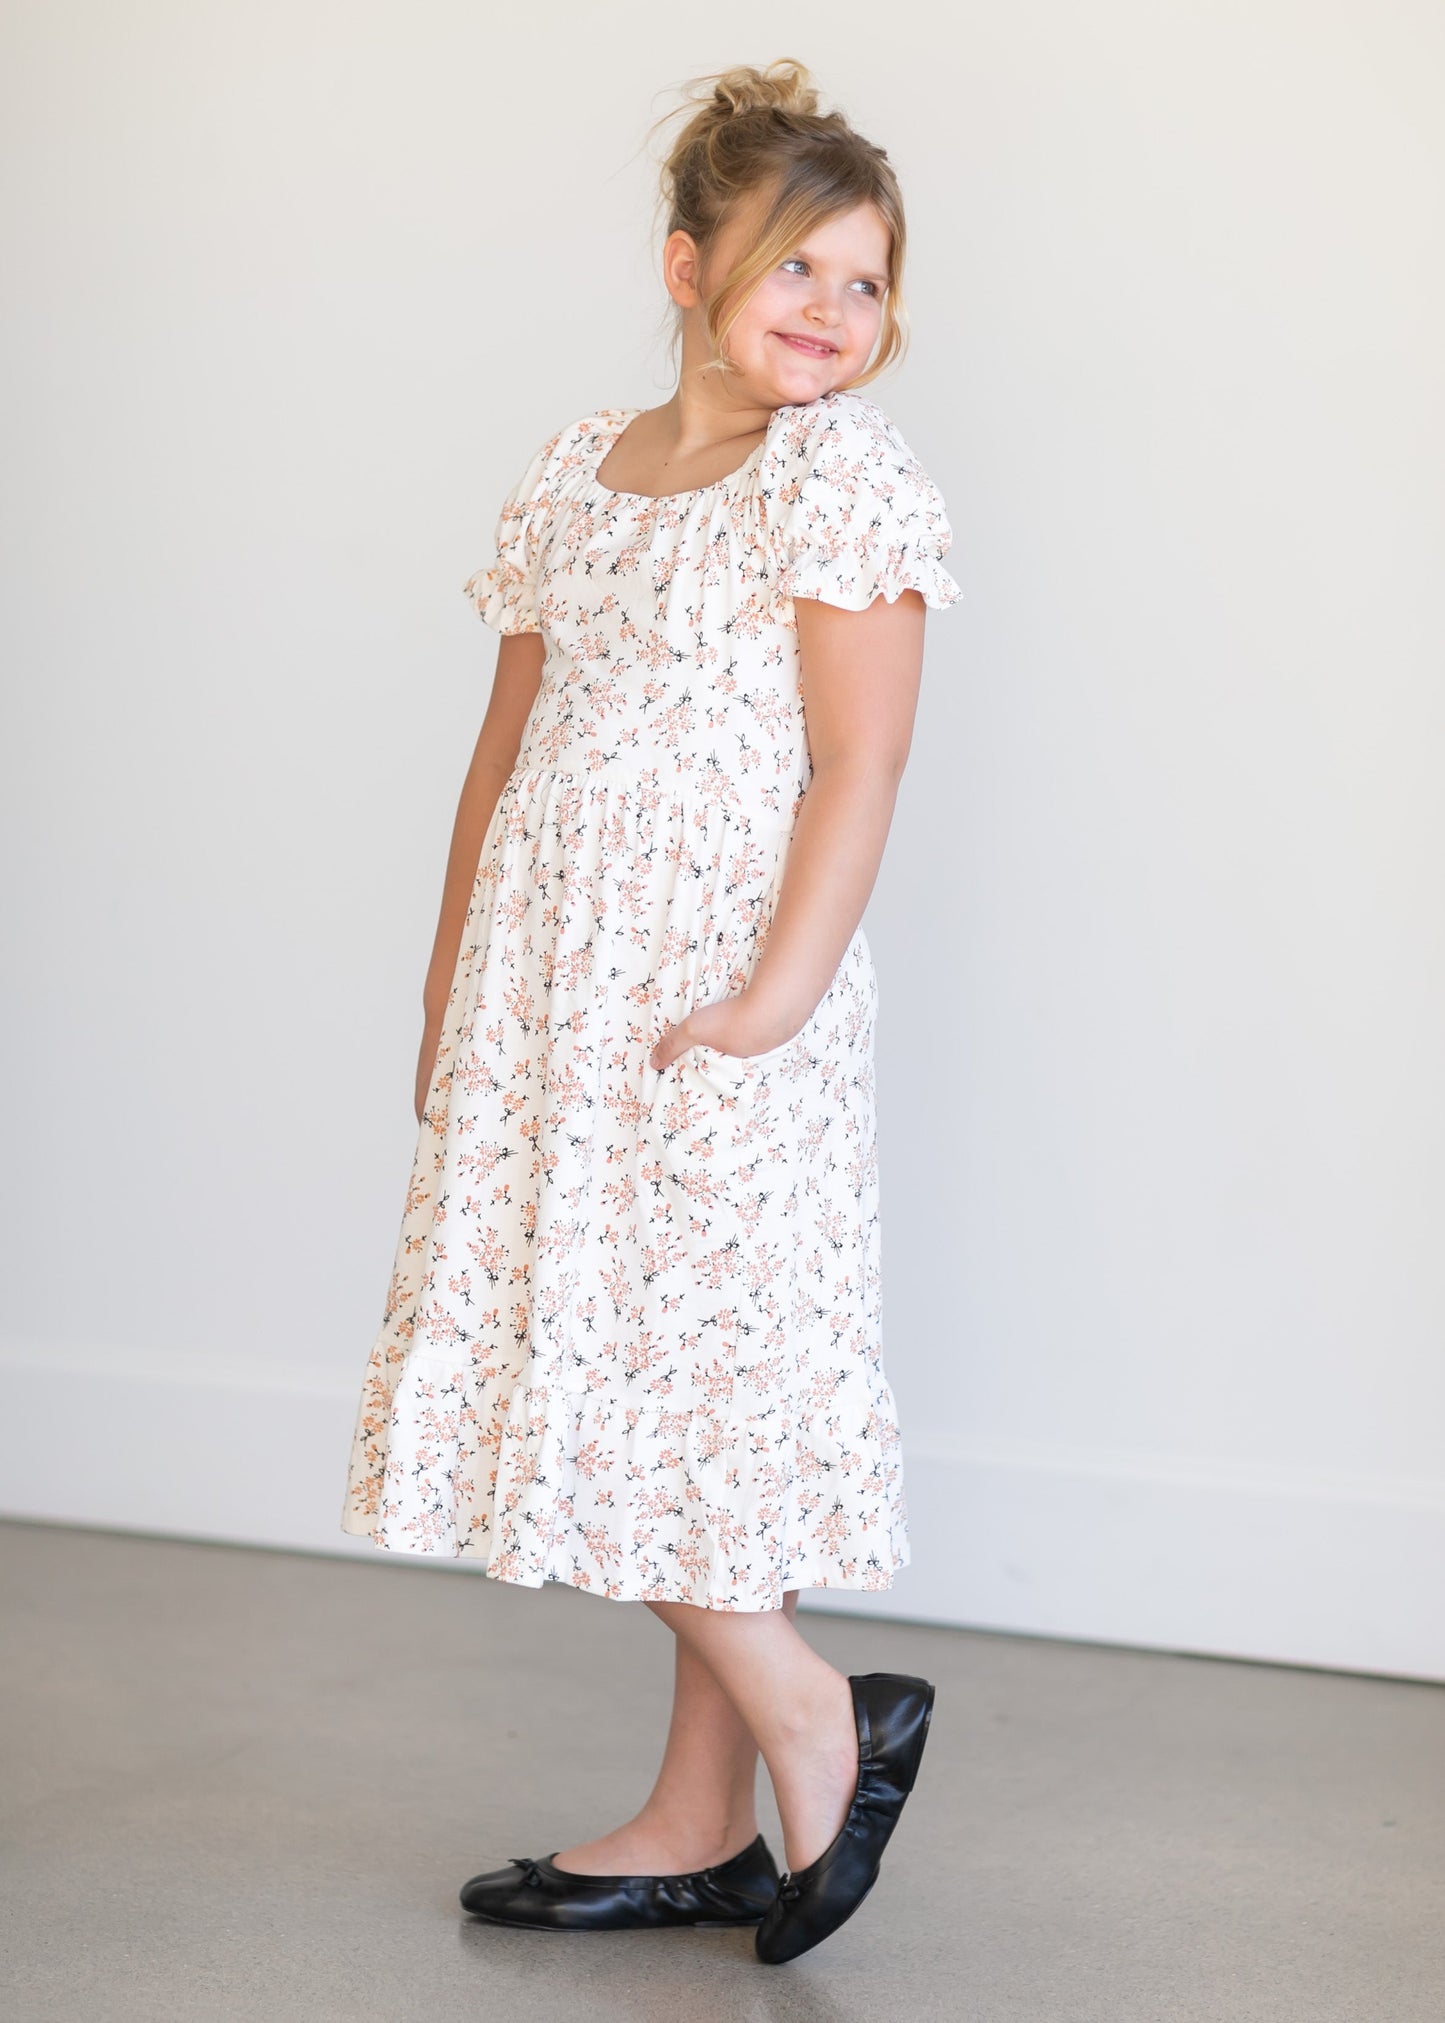 A girl's sized midi length white dress with an allover peach floral design with black stems. It has a high square neckline, puff sleeves, a stretchy waist, and a small ruffle at the hem.